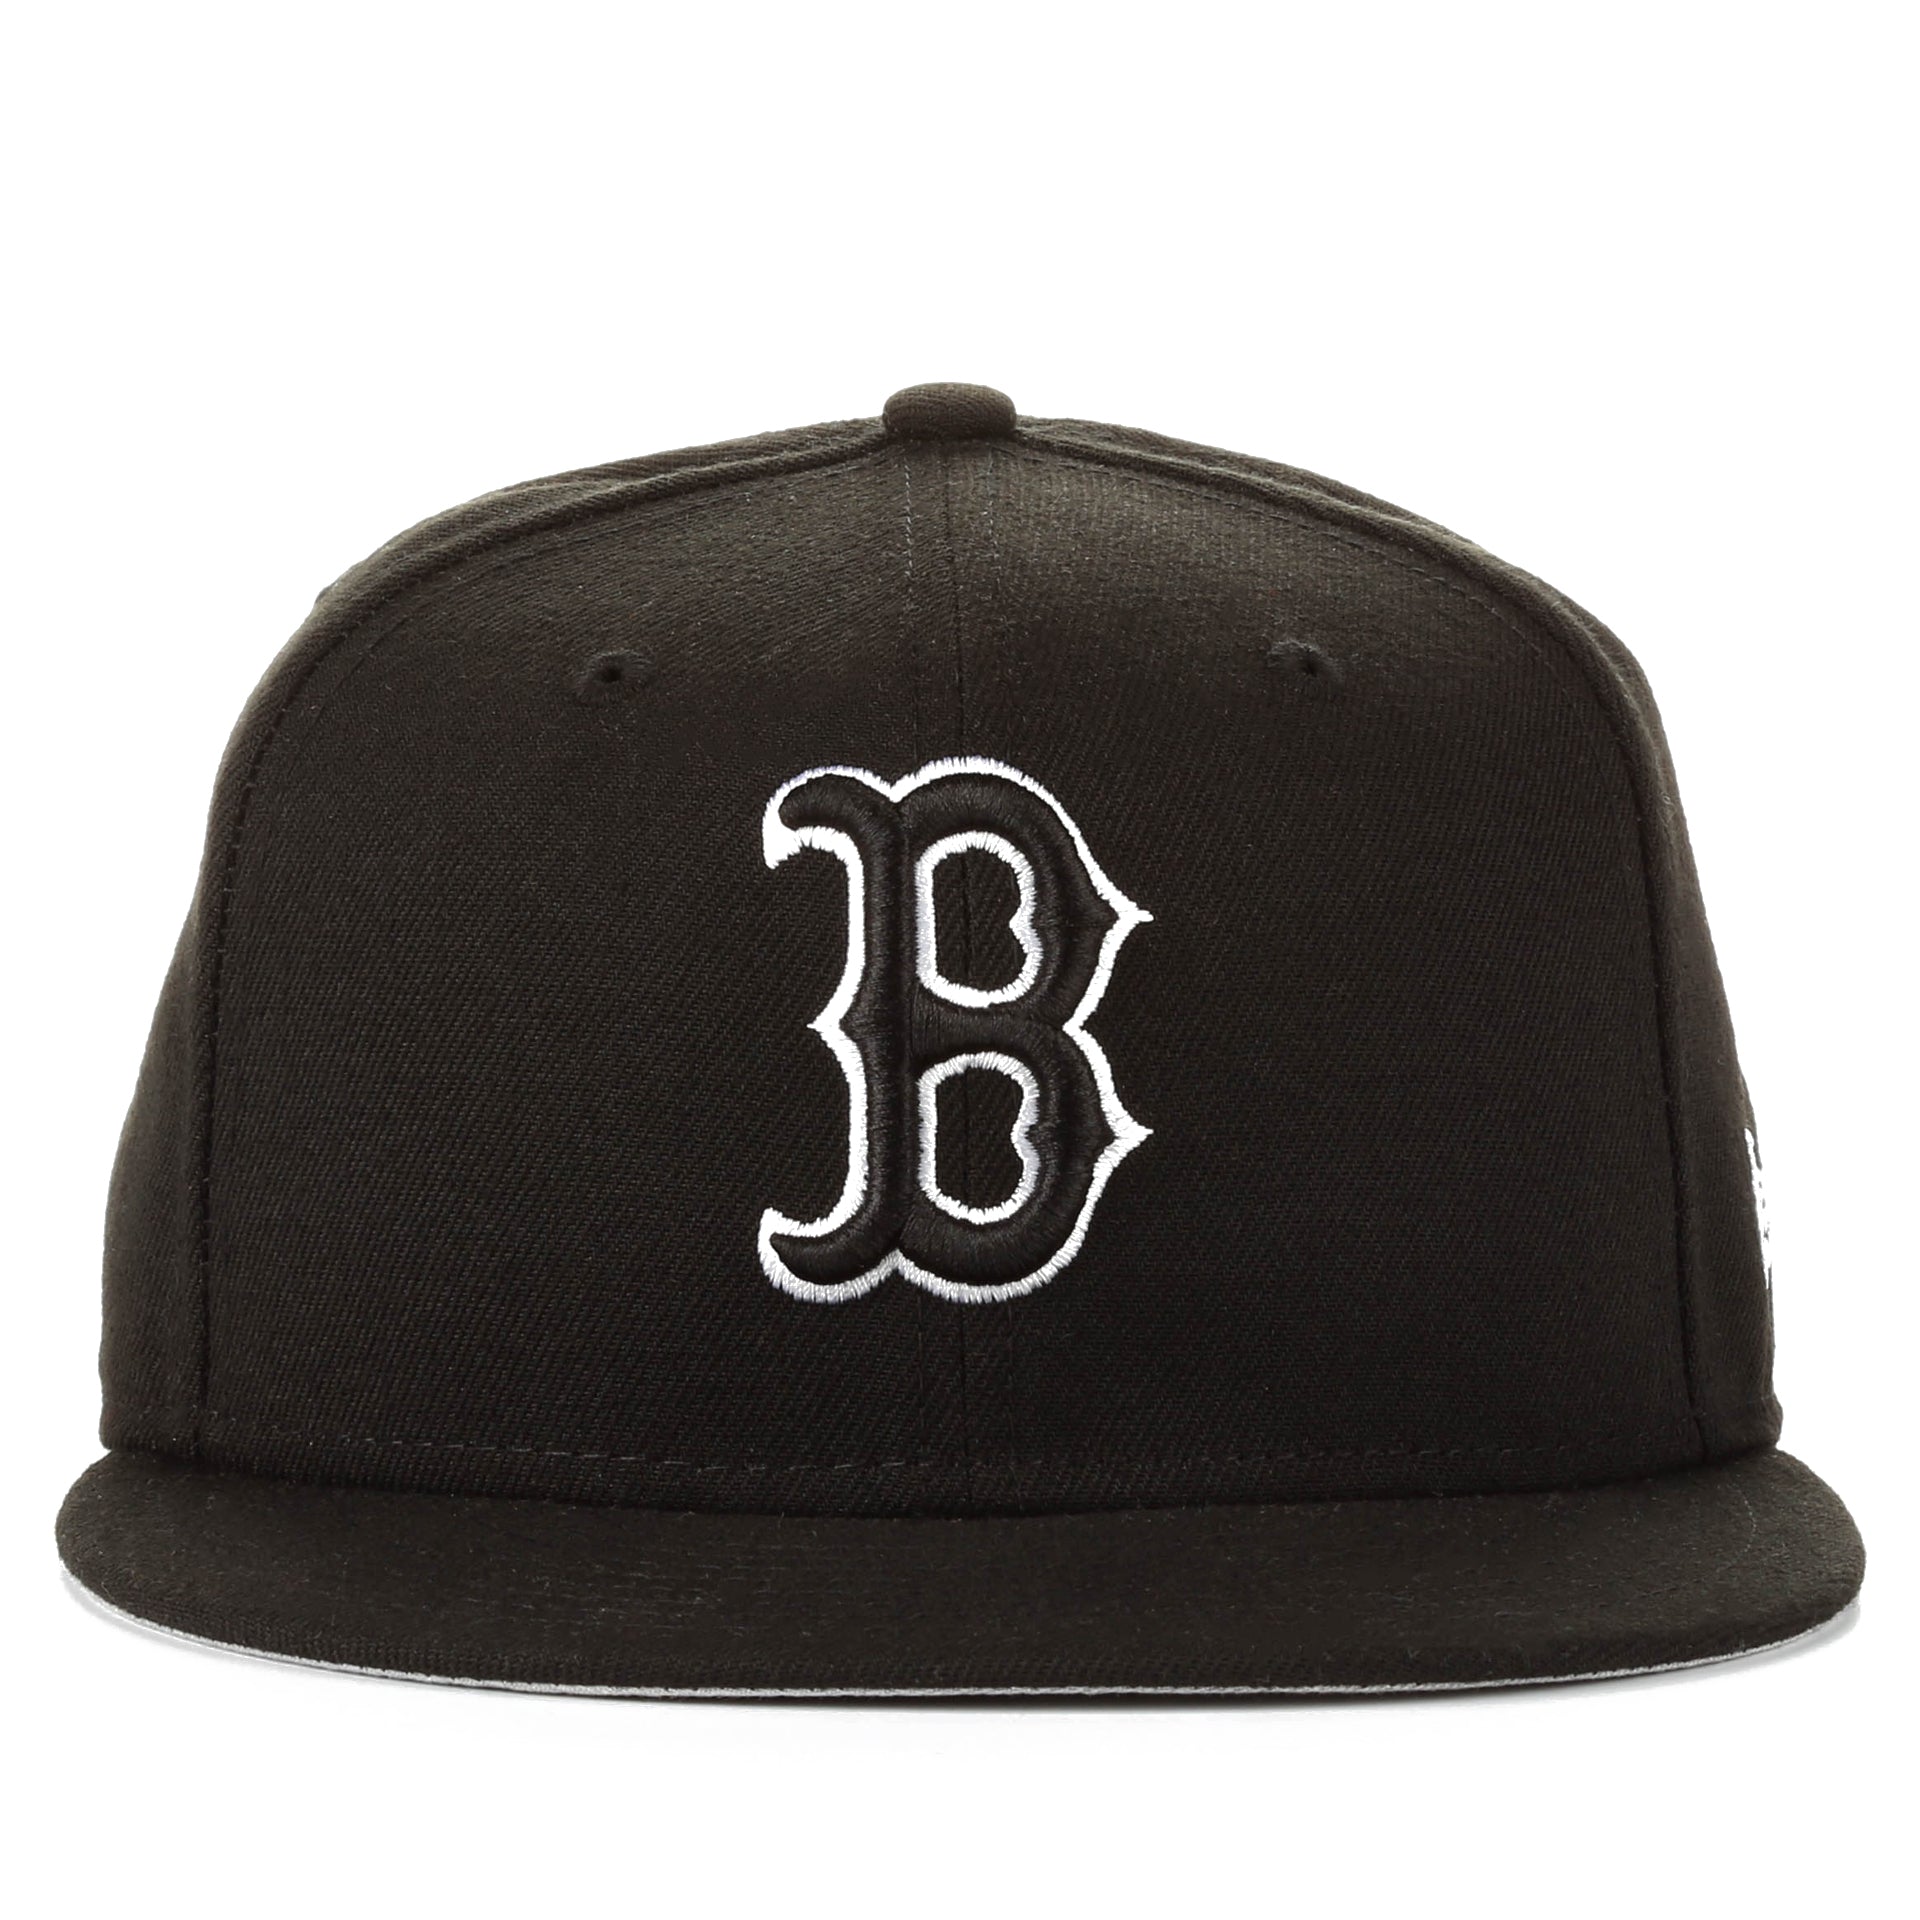 New Era 59Fifty League Basic Fitted Cap - Boston Red Sox/Black - New Star